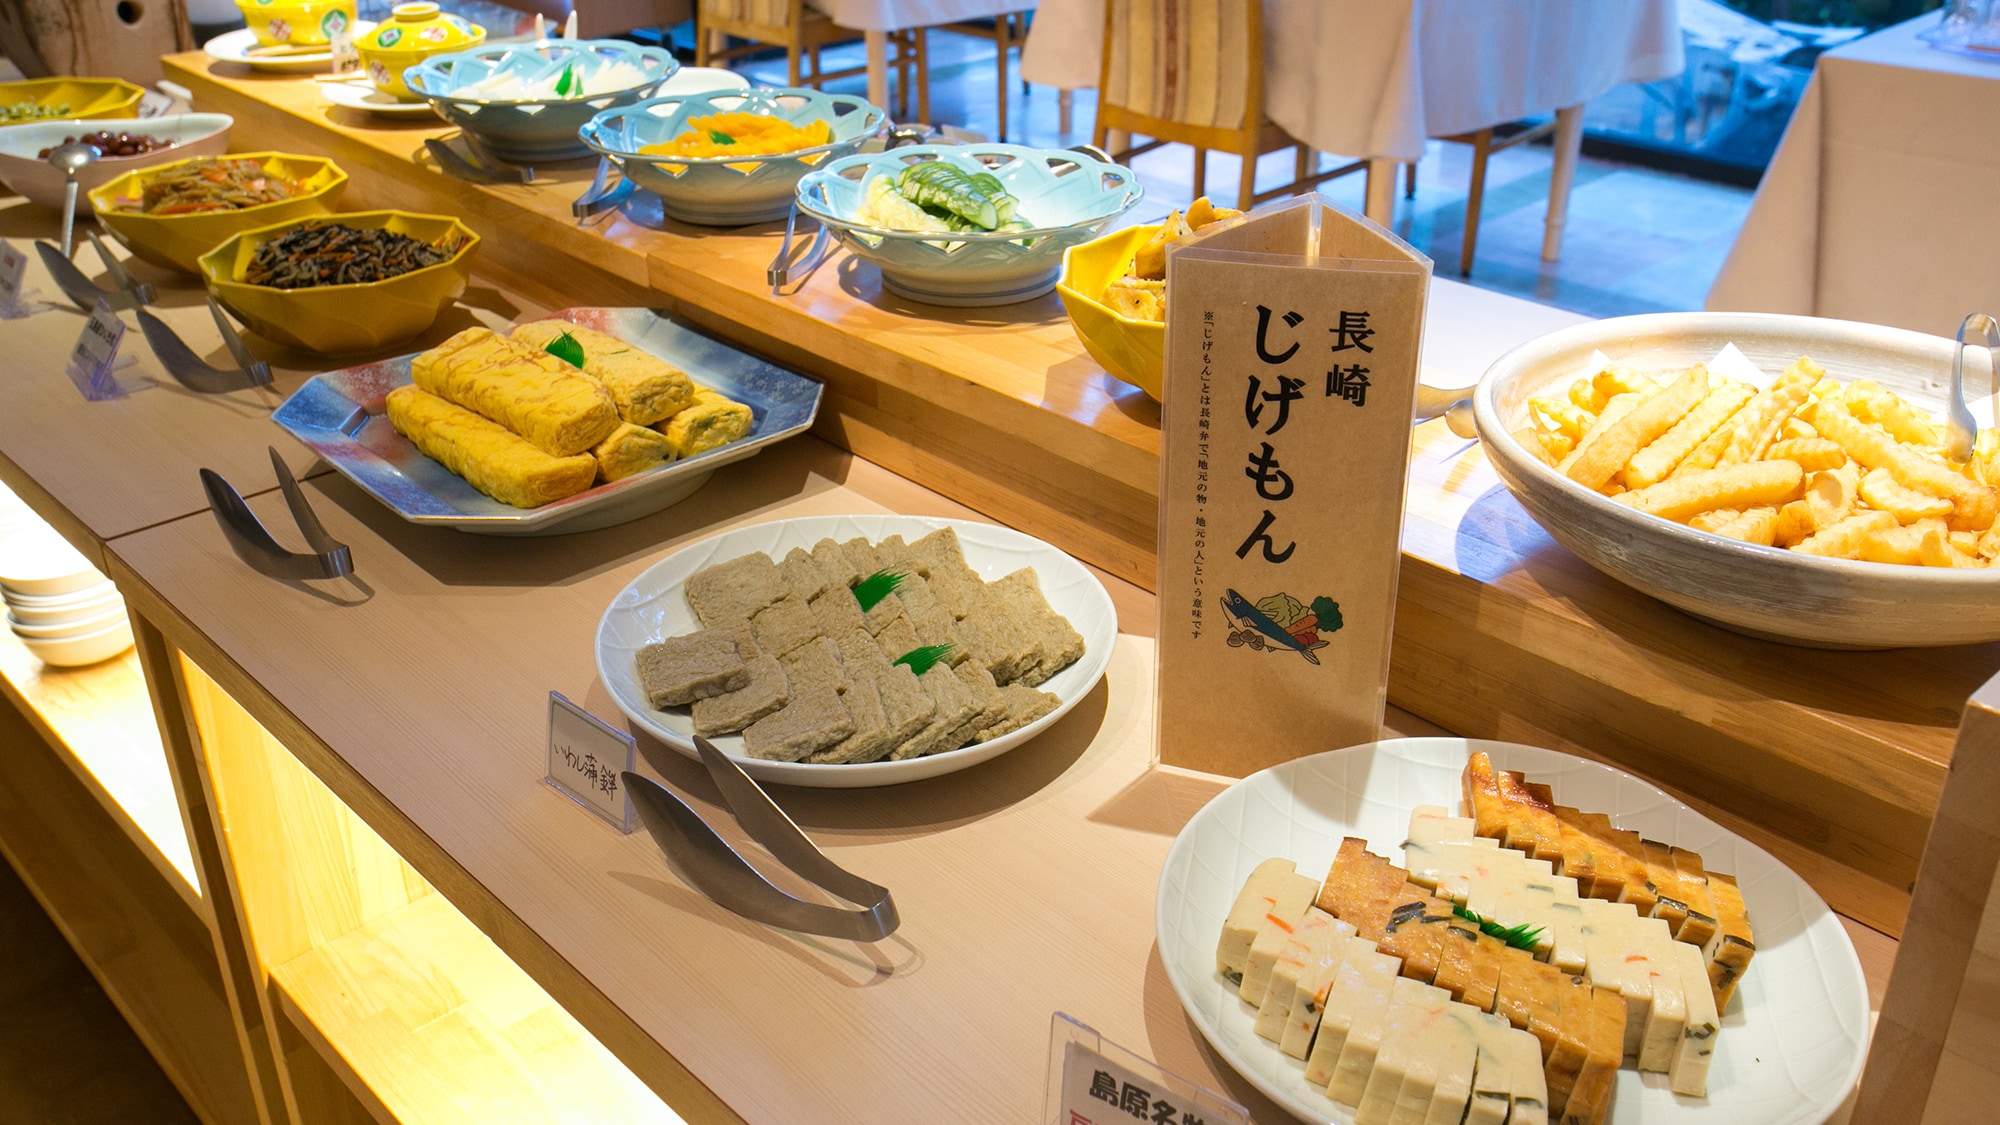 A buffet style that uses local, Nagasaki-produced rice, vegetables, fish, etc., and Kyushu's specialty.